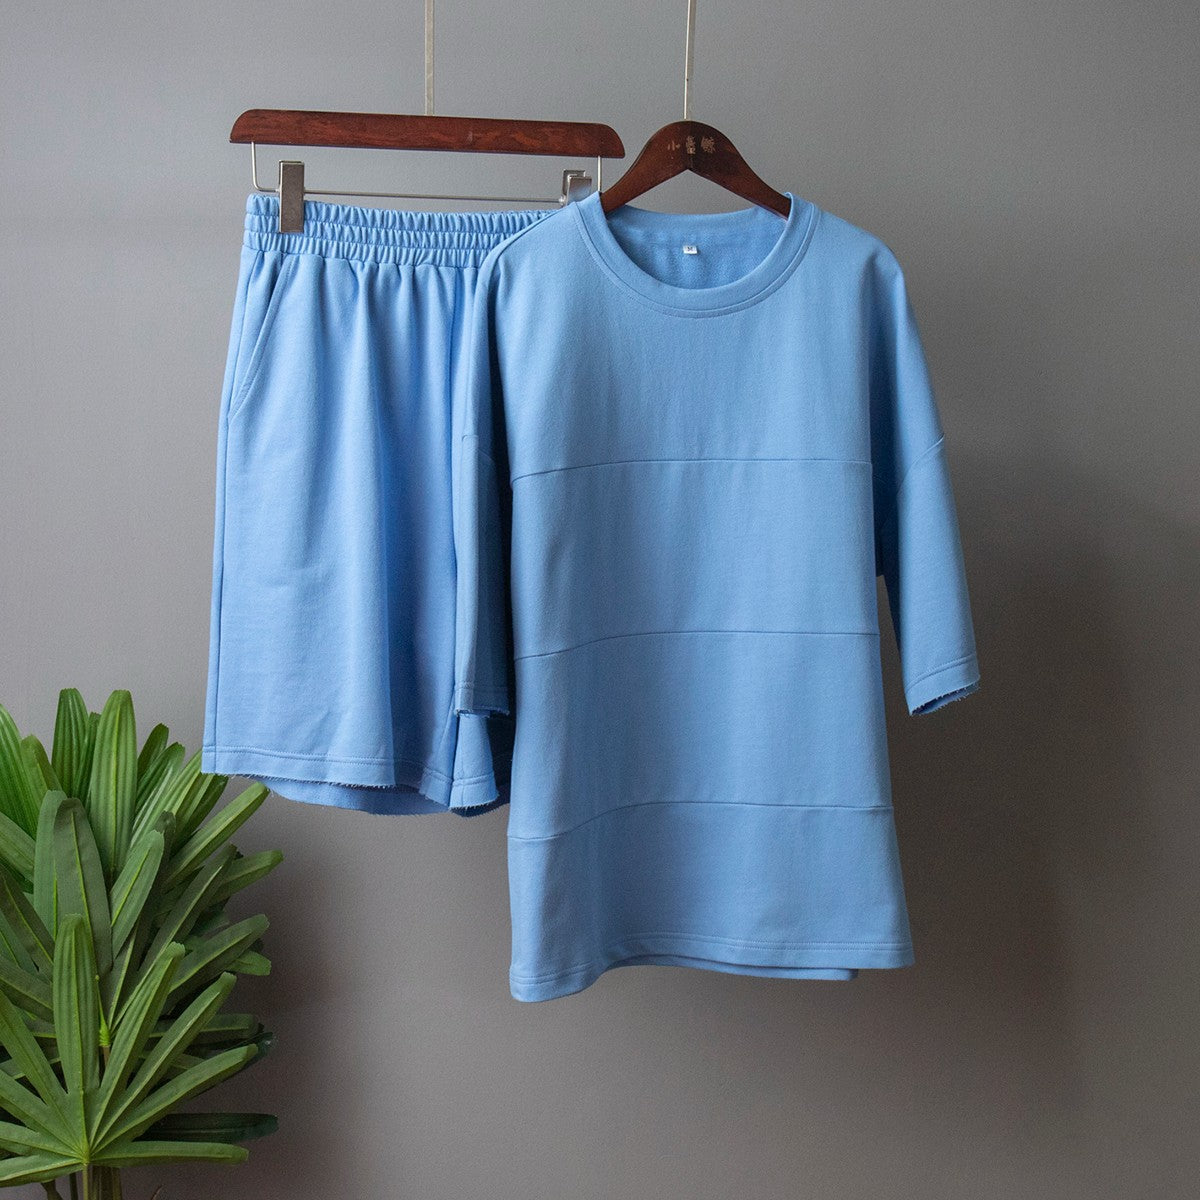 Casual Soft Cotton Short Sleeves T Shirts and Shorts